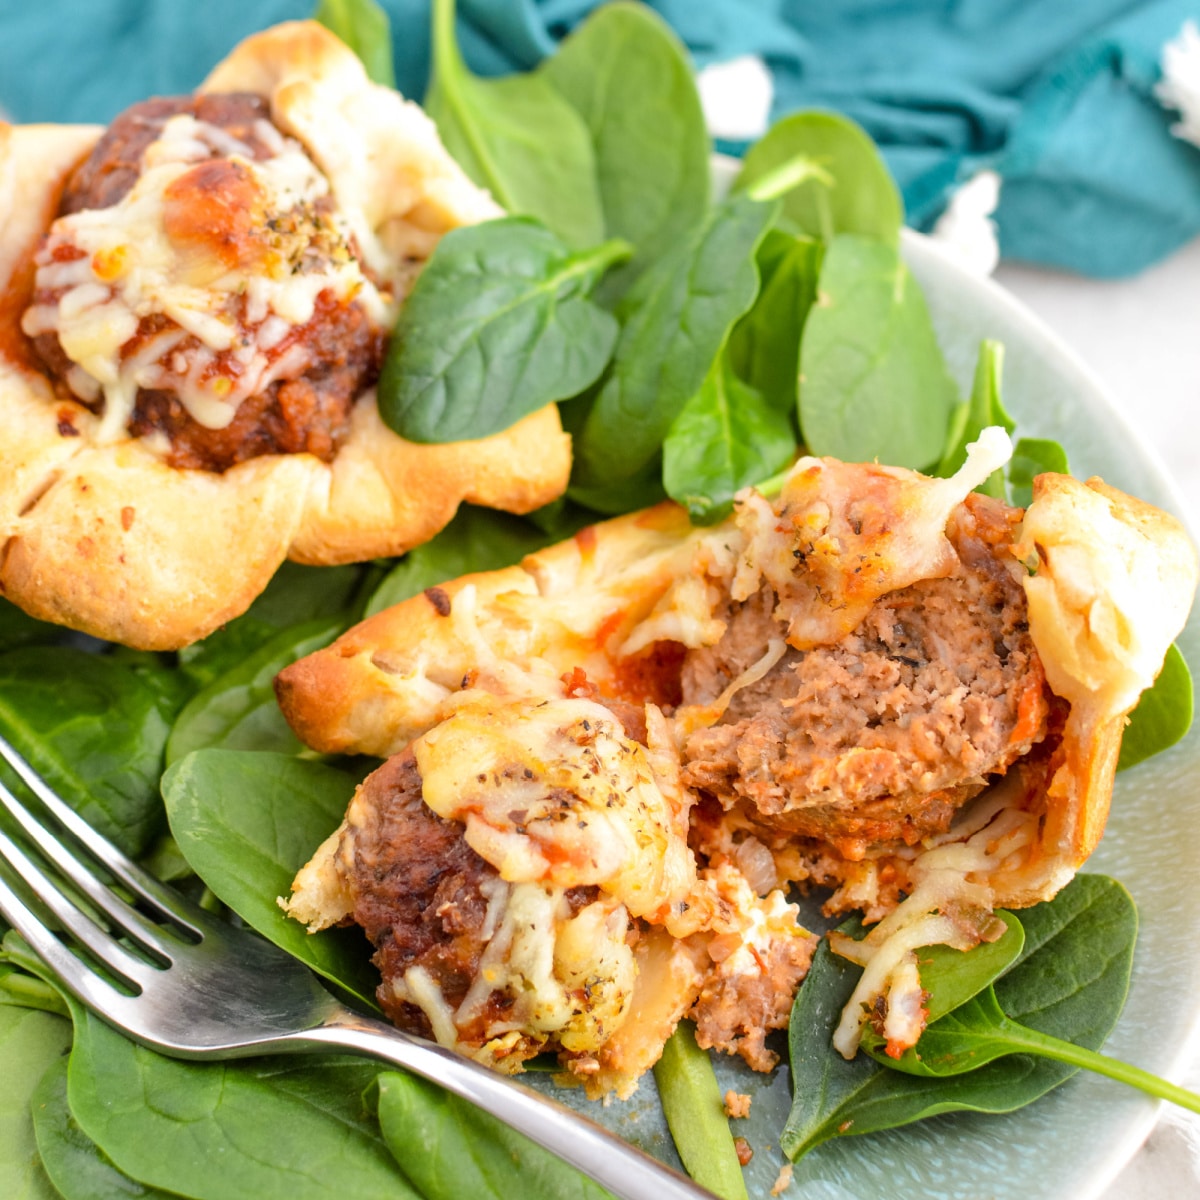 Cheesy Meatball Sub Cubcakes on a bed of greens.